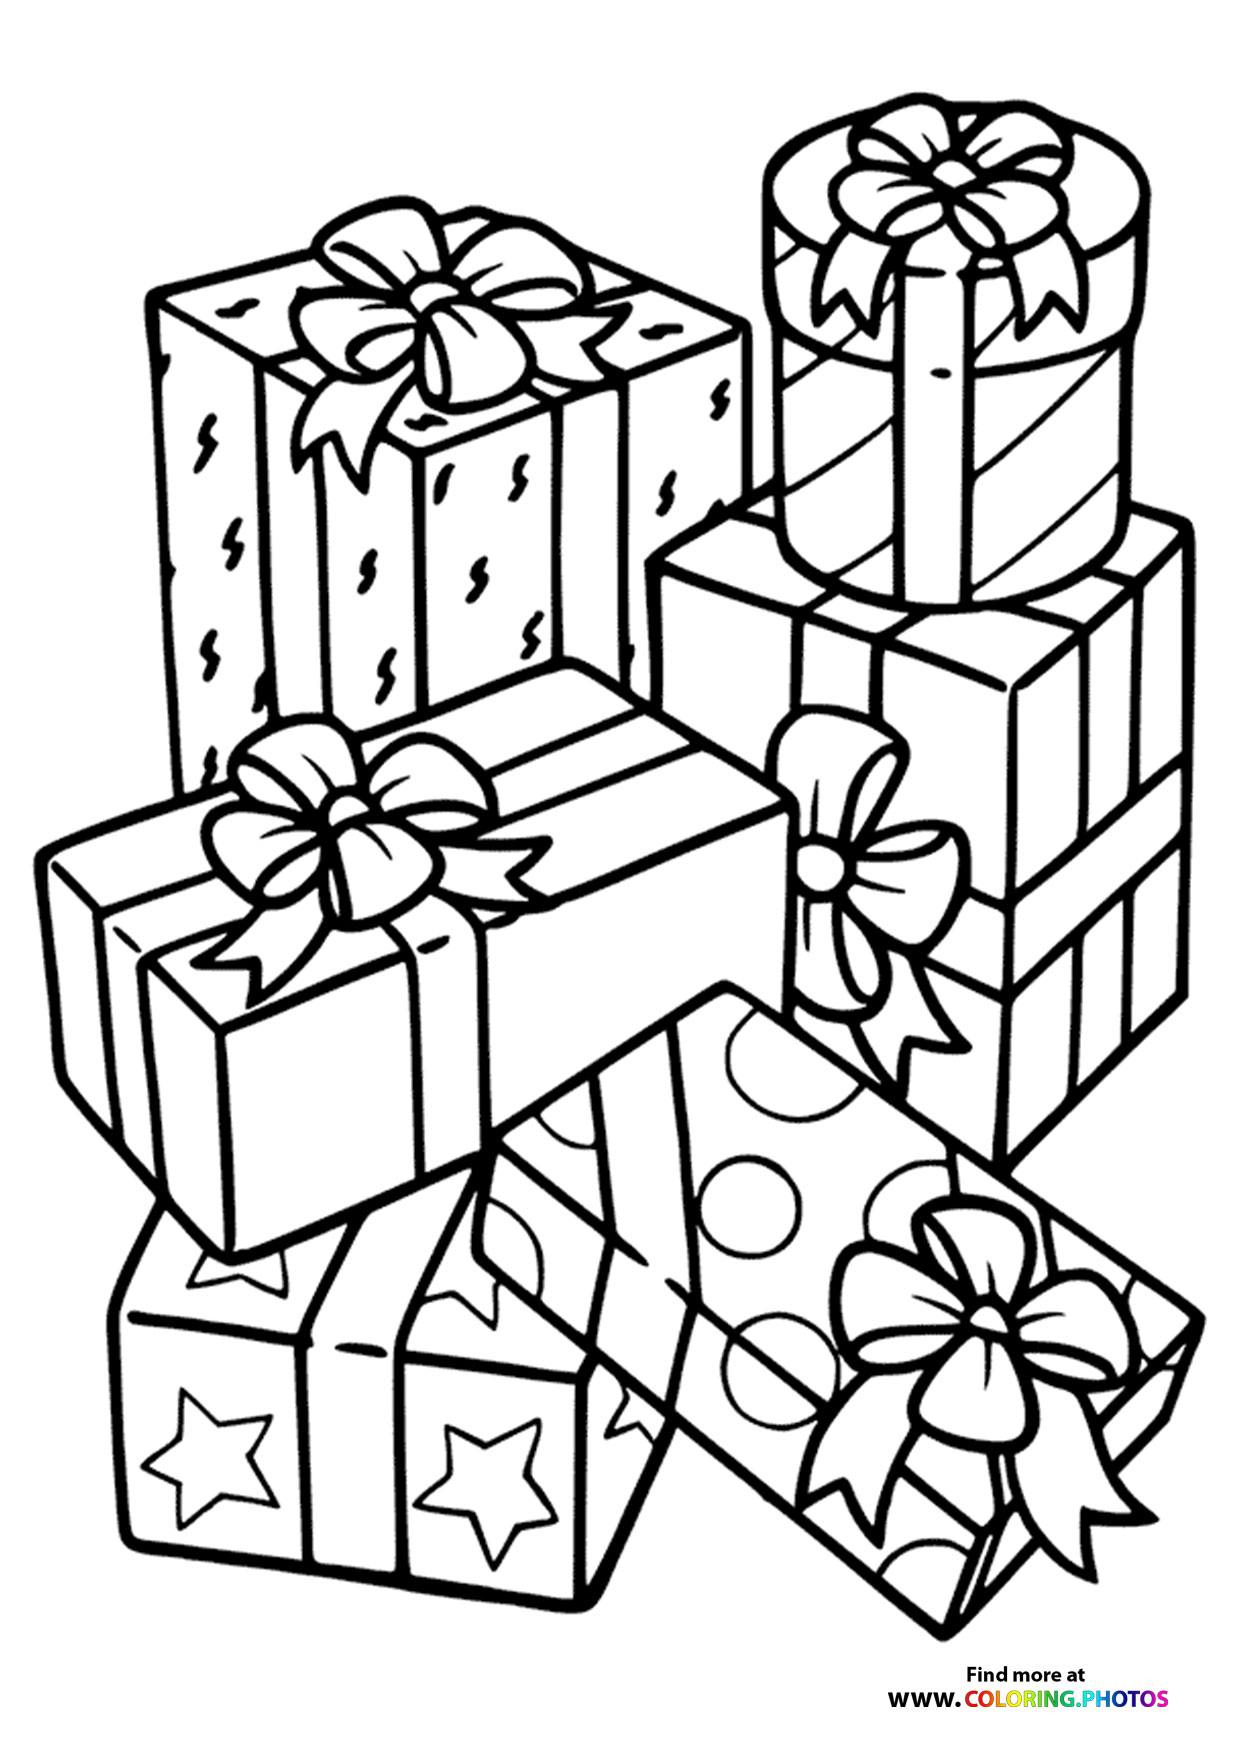 Presents Coloring Page | Super Simple